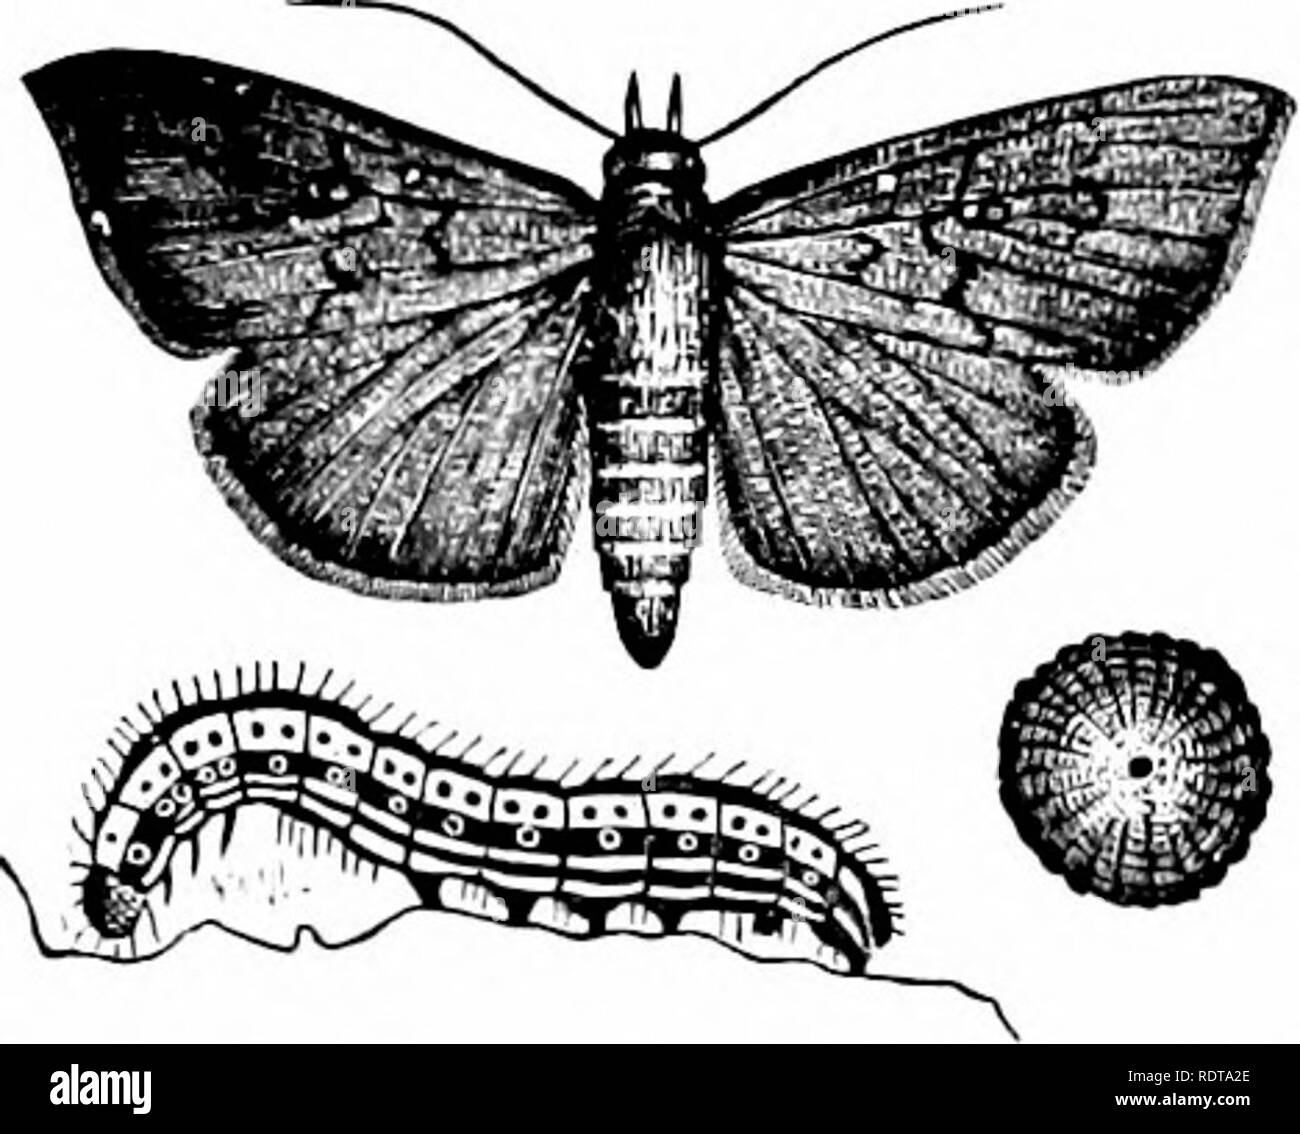 . Zoology. Zoology. 128 Z00LOO7. size and very long tongue. The butterflies diSer from the moths in having knobbed an- tenna, while their chrysalides are often ornamented with golden or silver}^ spots. Order IG. Ilyriieno])tera.— The bees stand at the head of the insect series in jierfection of parts, especially those of the mouth. Fig. i65.-EgK, caterpillar,and moth ^he Hymmwptera are repre- ot Aw.mis xuiiua, the cottoD sentcd bv the saw-flics, the gall- Army-worni. -^ ^ o files, the ichneumon-fiies and the ants, the sand-wasps, mud-wasps, paper-making wasps, and bees. The lowest family is th Stock Photo